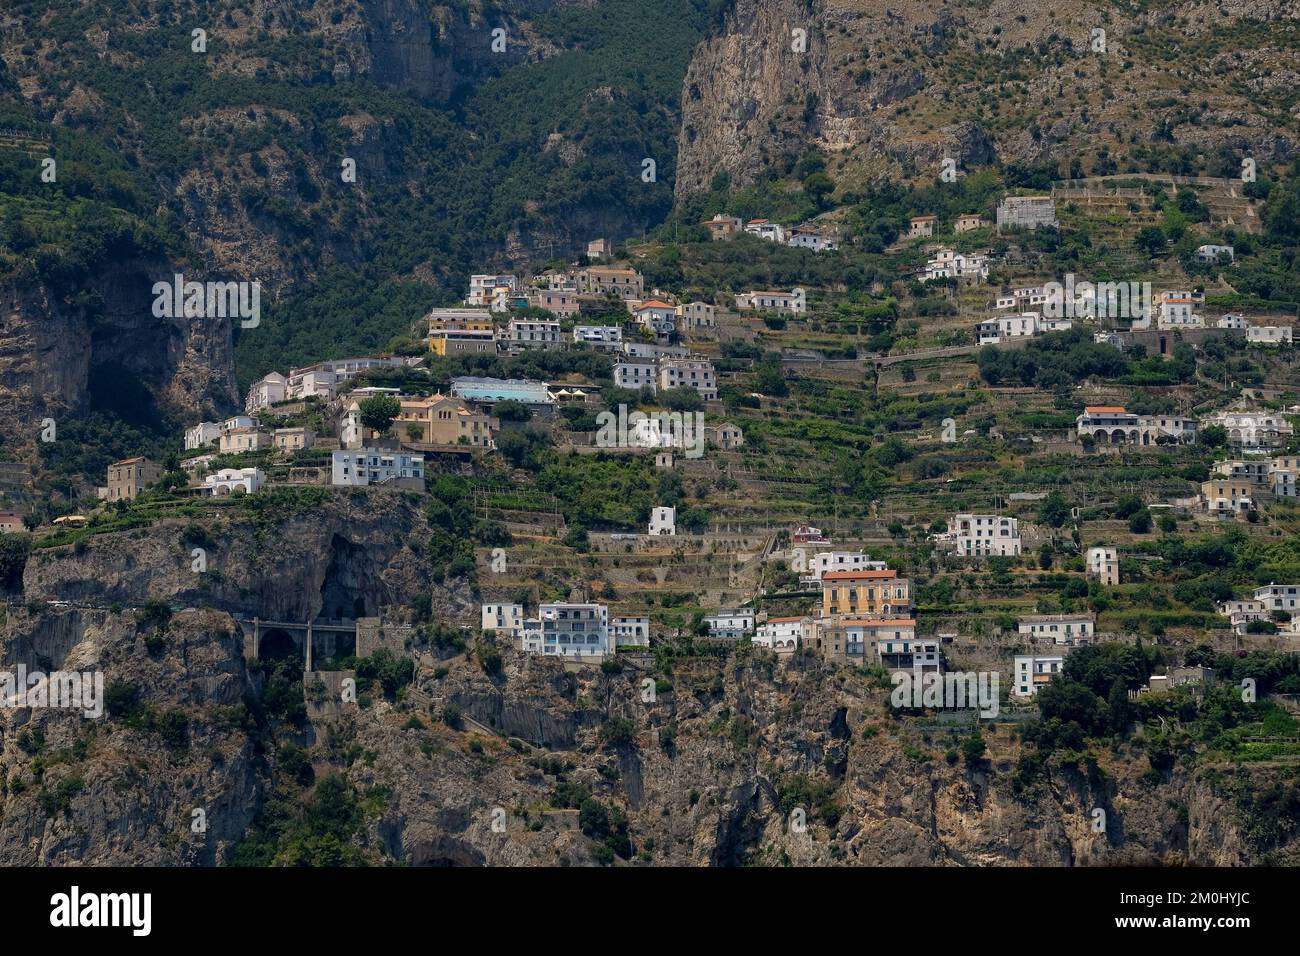 View of the houses and hotels nestled amongst the cliffs of the Amalfi coast. Stock Photo